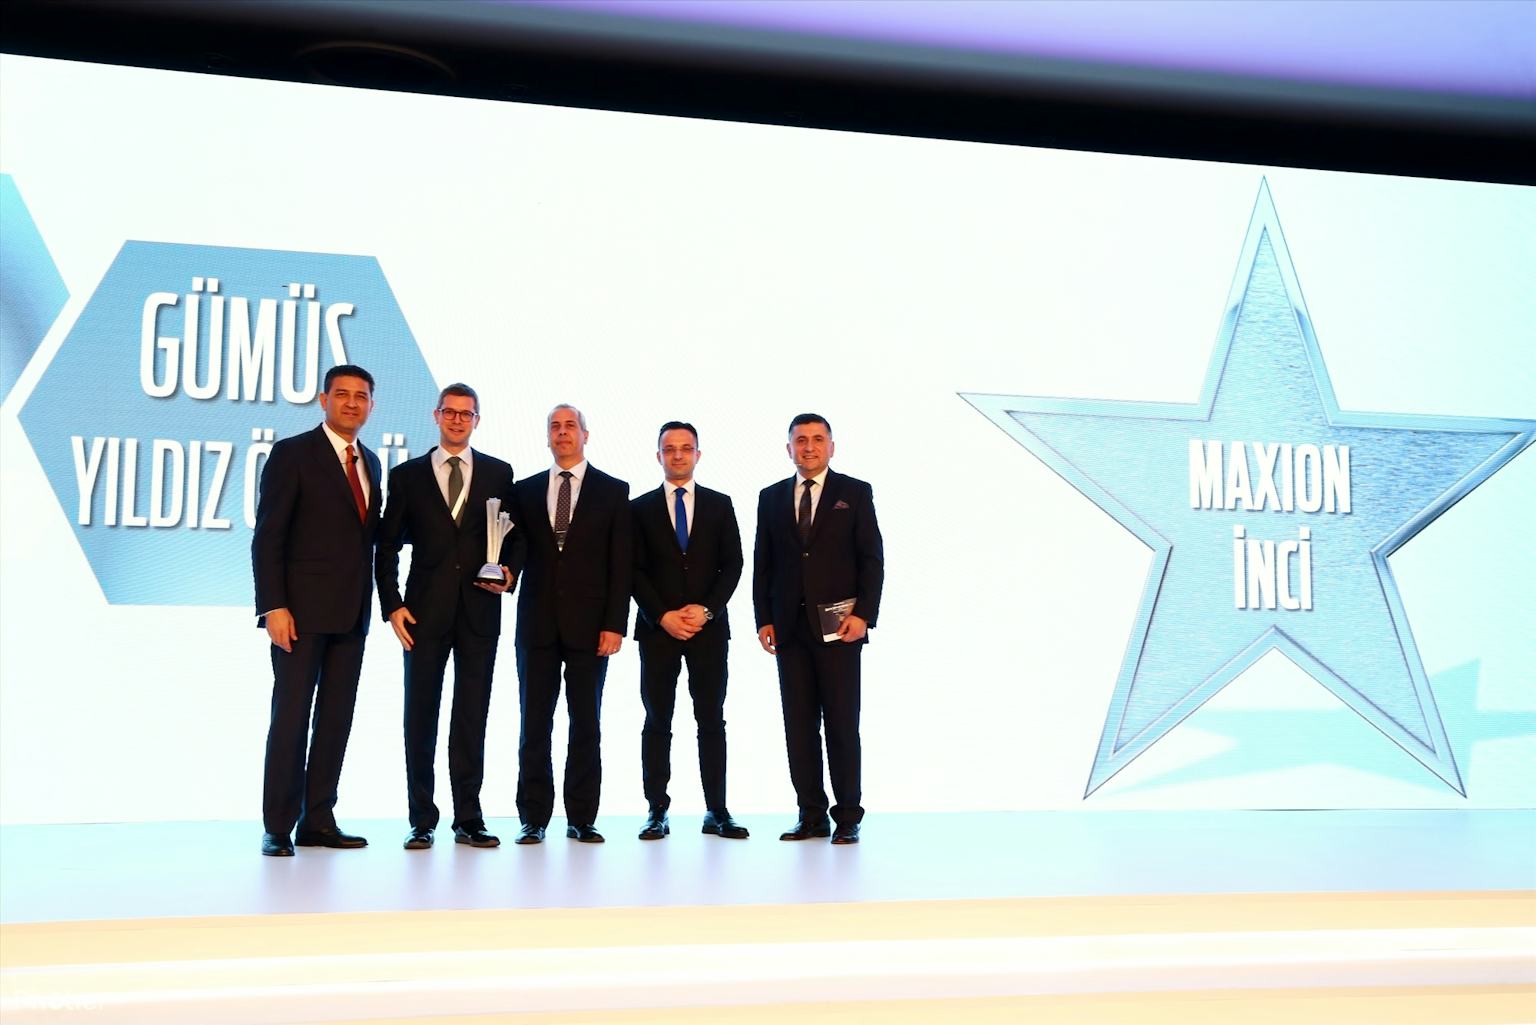 Manufacturer of the Year Award for Maxion İnci